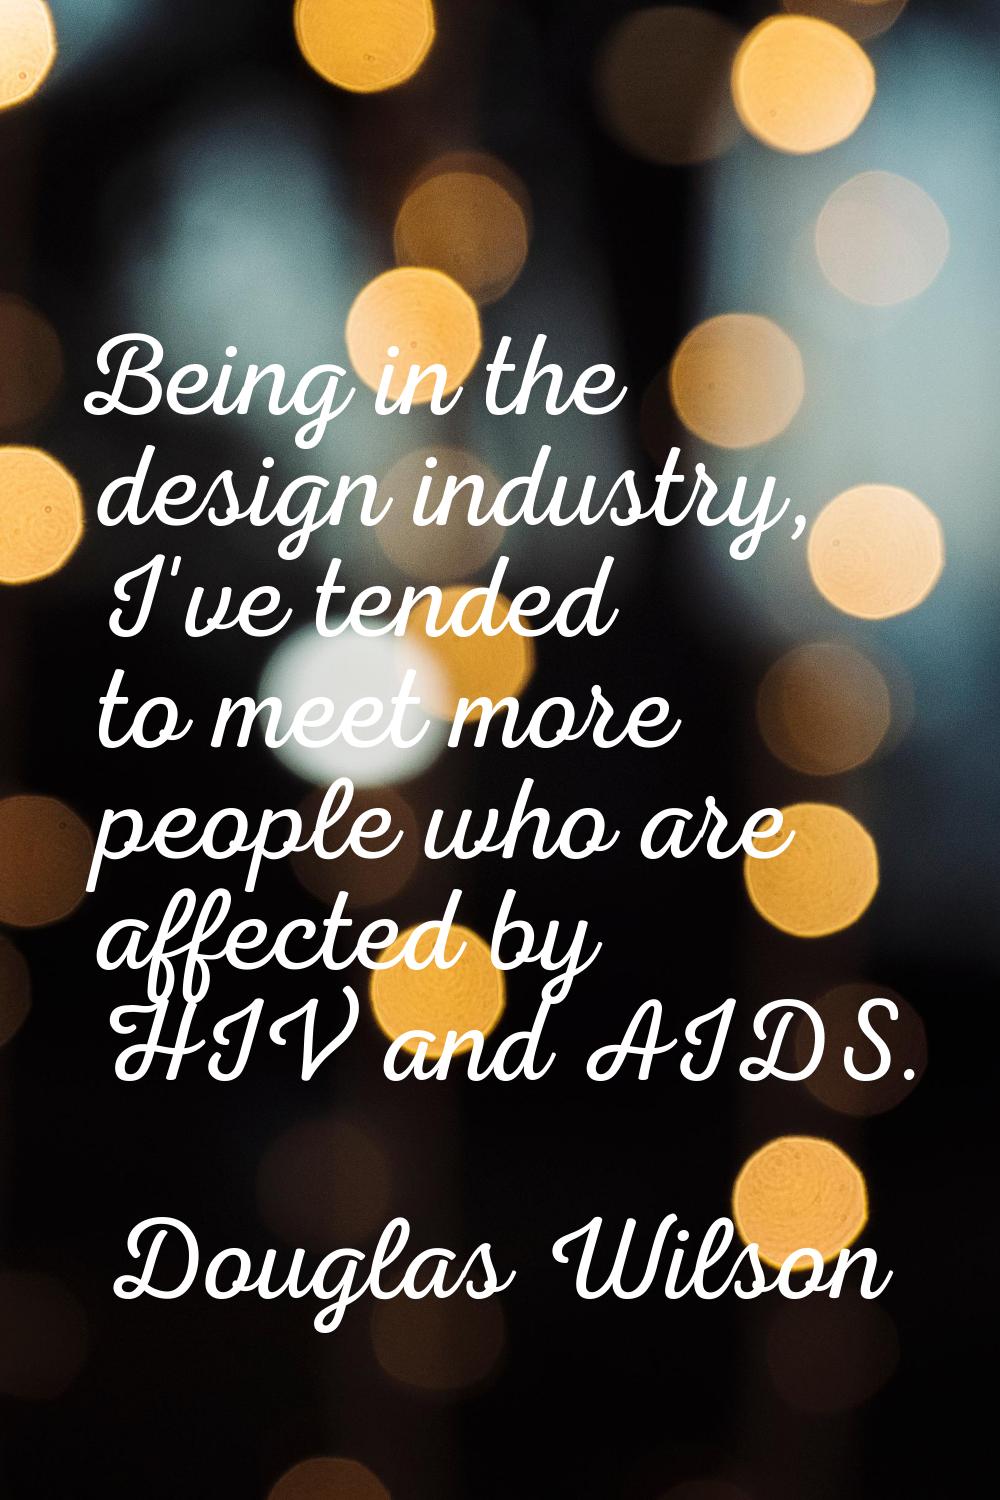 Being in the design industry, I've tended to meet more people who are affected by HIV and AIDS.